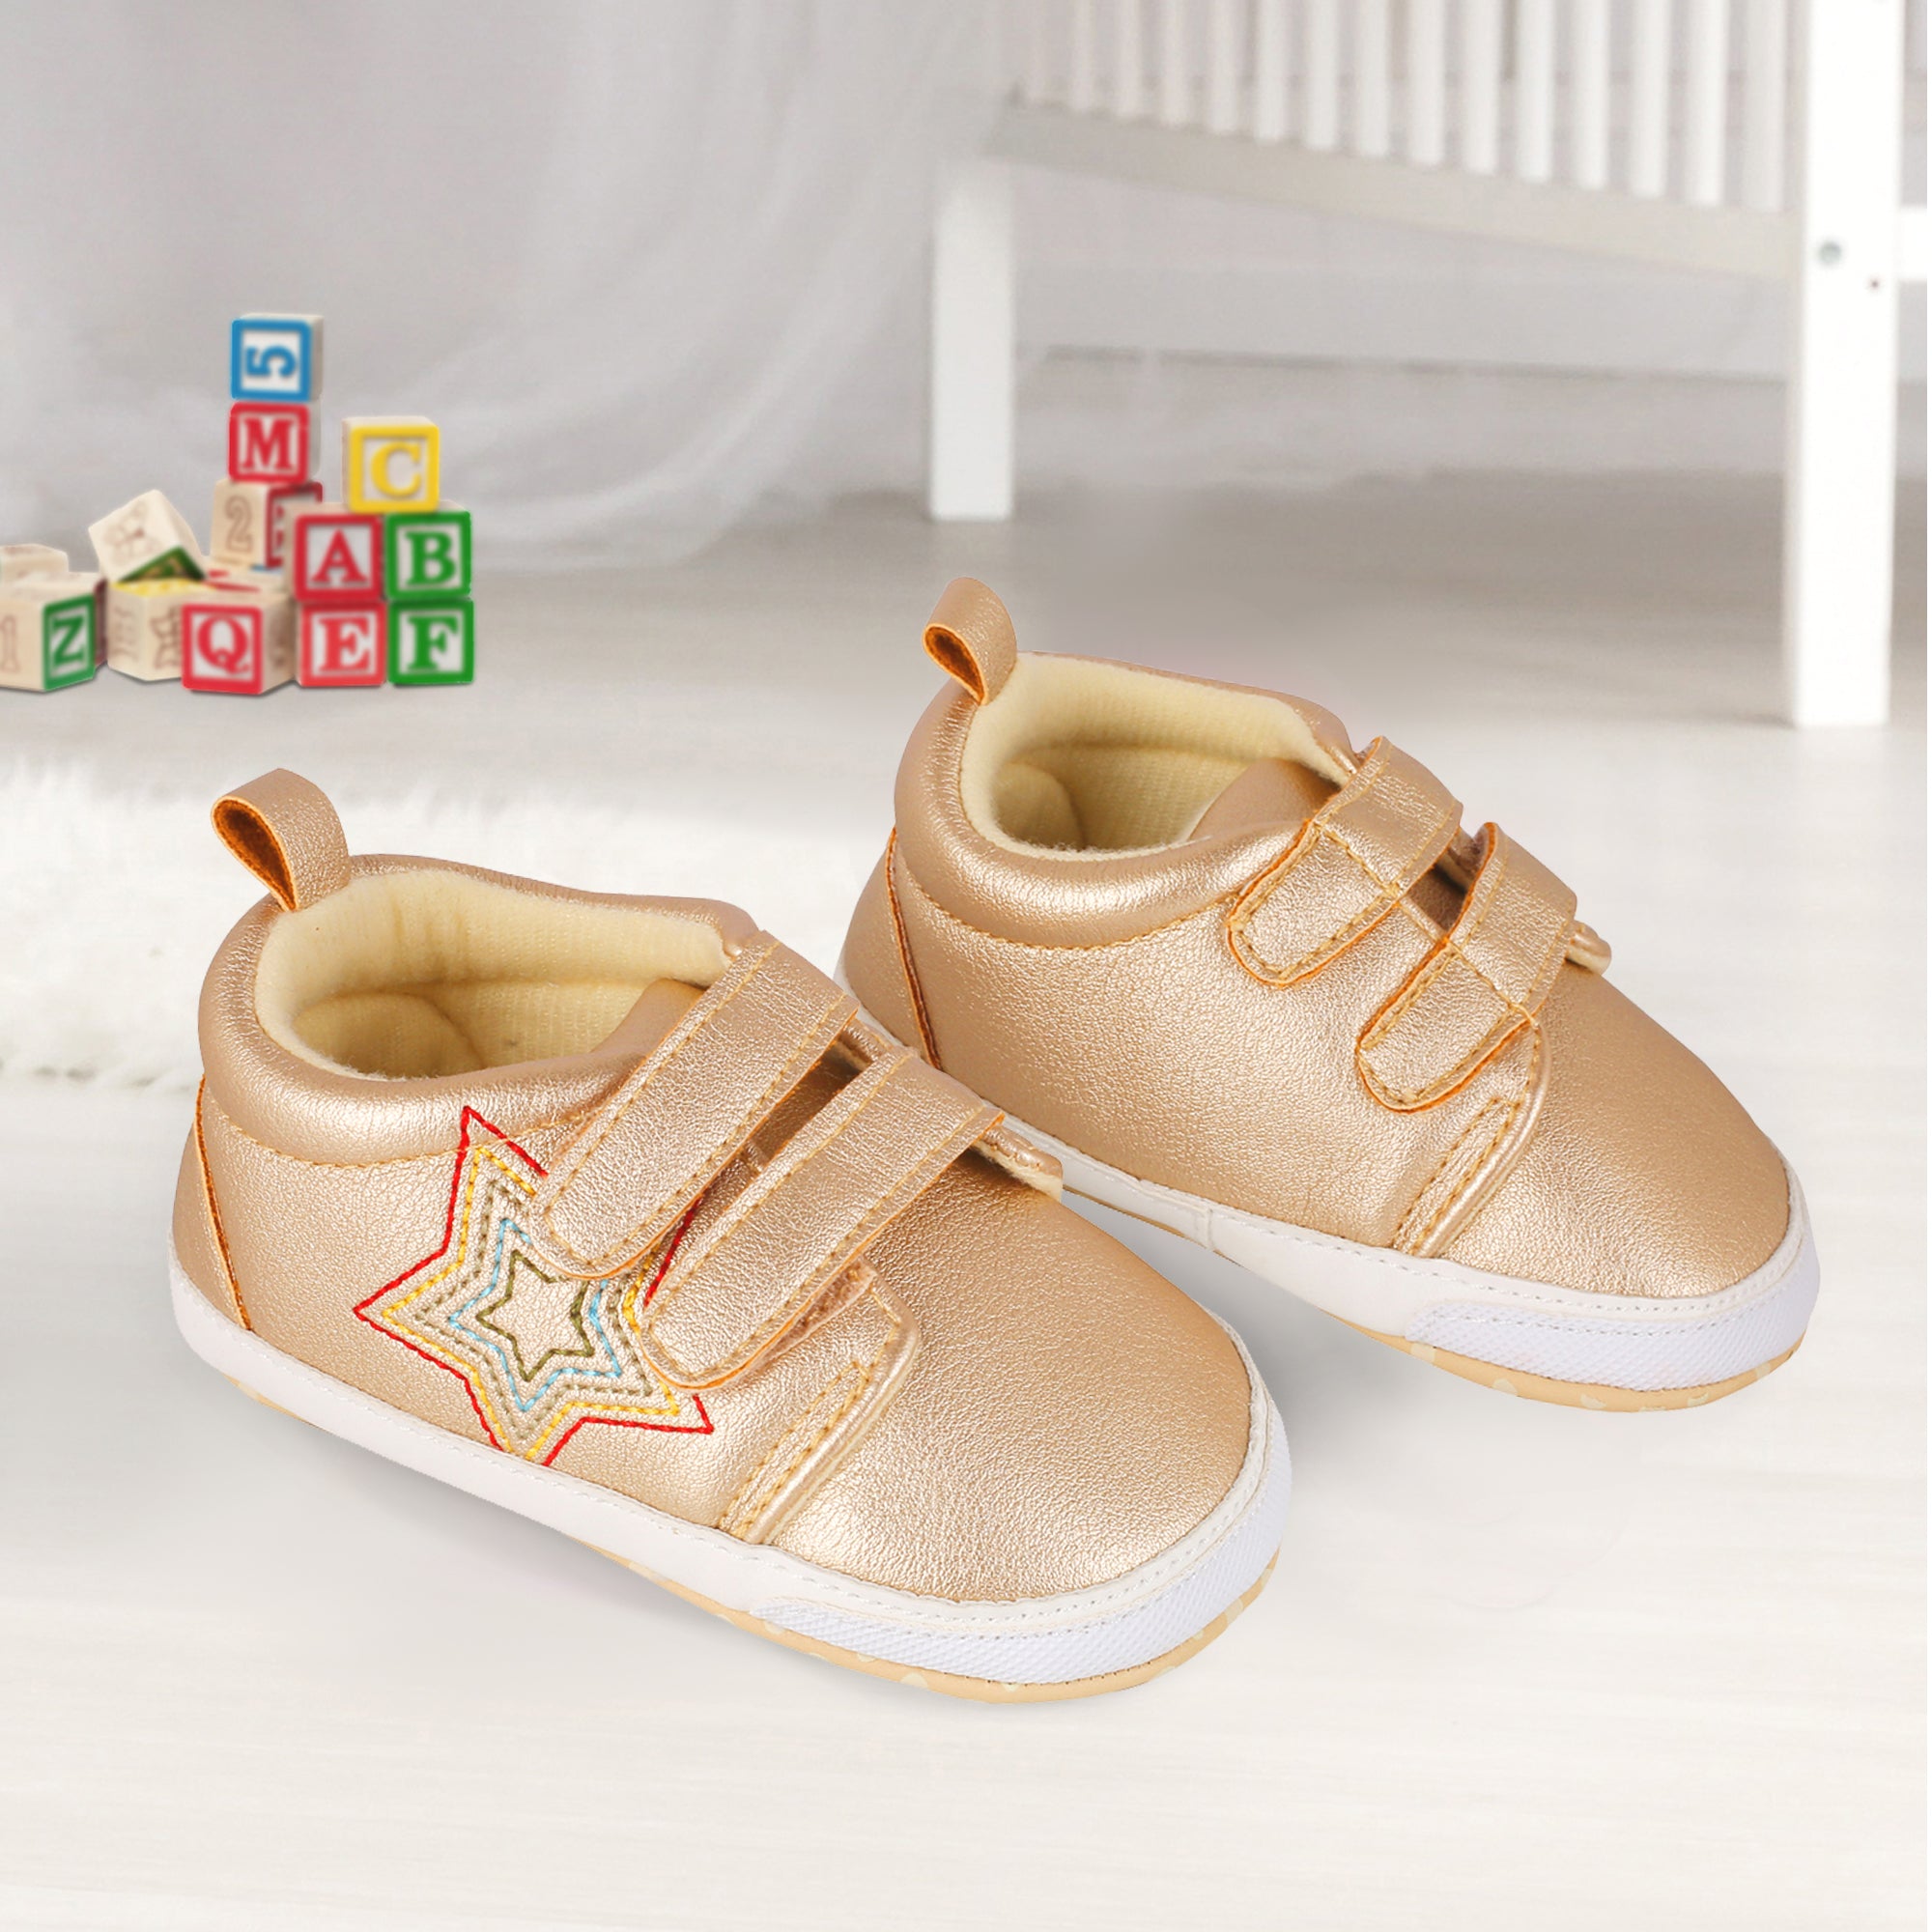 My Star Gold Casual Booties - Baby Moo